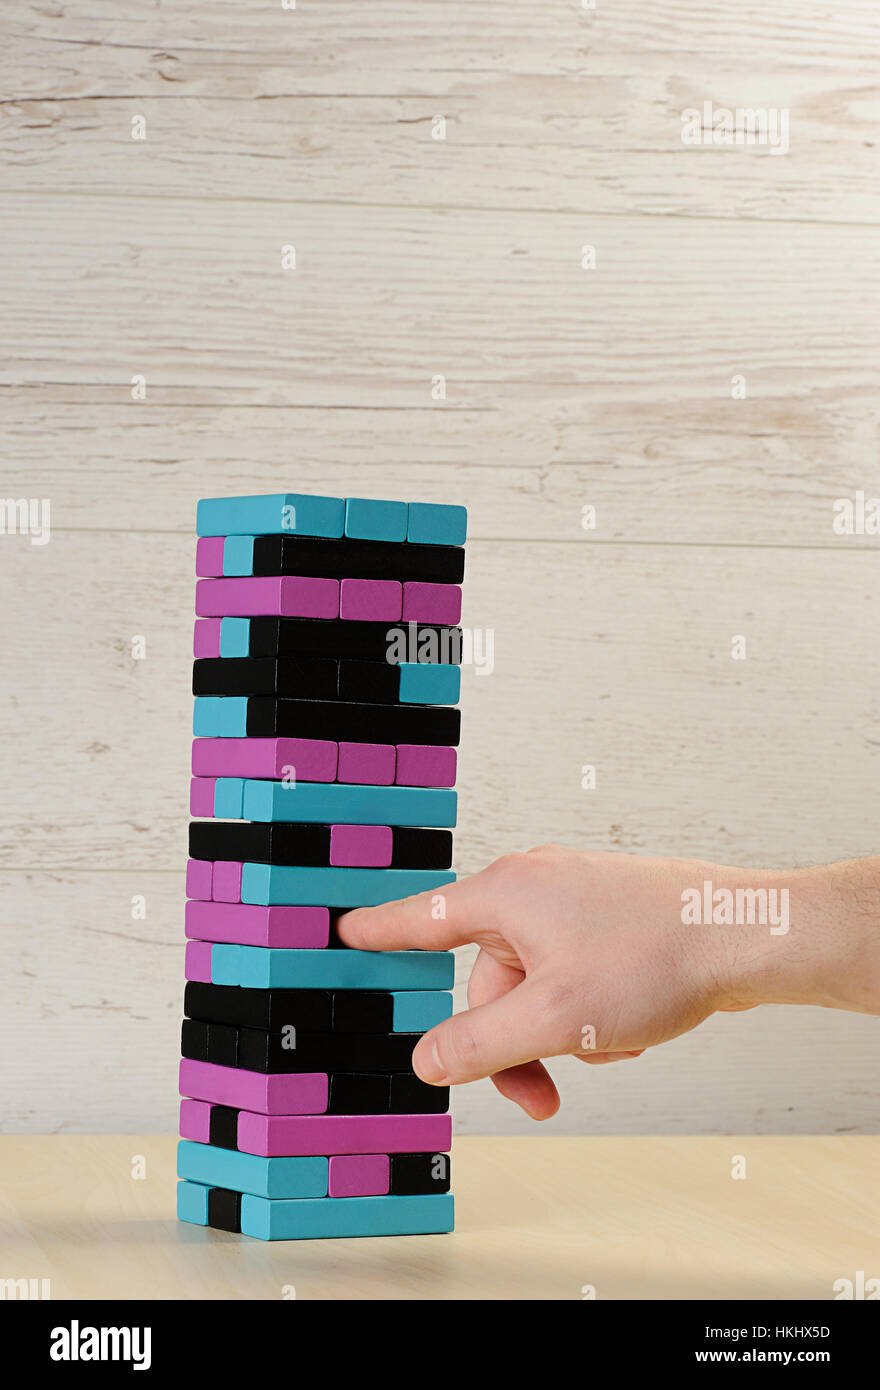 pull jenga tower brick colour on wood table with hand Stock Photo